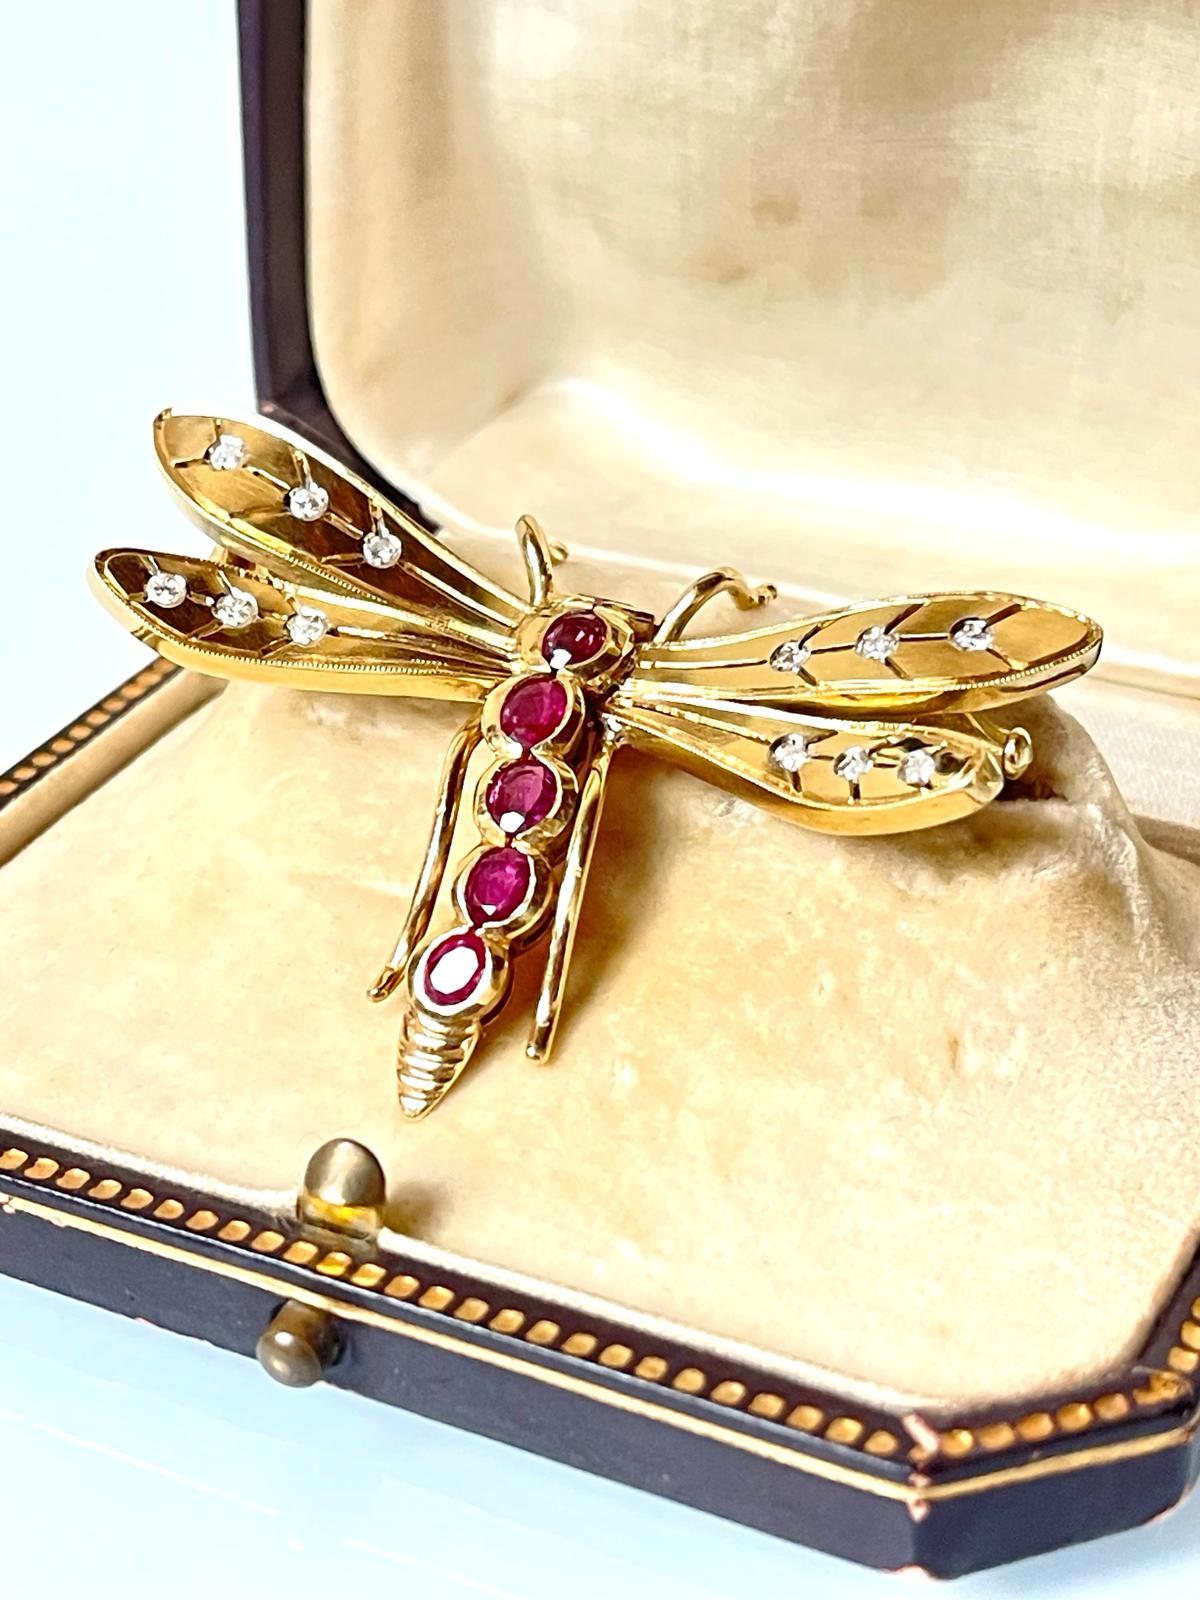 Fashionable vintage 18K yellow gold, ruby and diamond dragonfly brooch. Colourful, embellished with 6 natural, non-treated bright violet red rubies, this brooch is very well made, large in size and looks extremely stylish when worn. 

Item